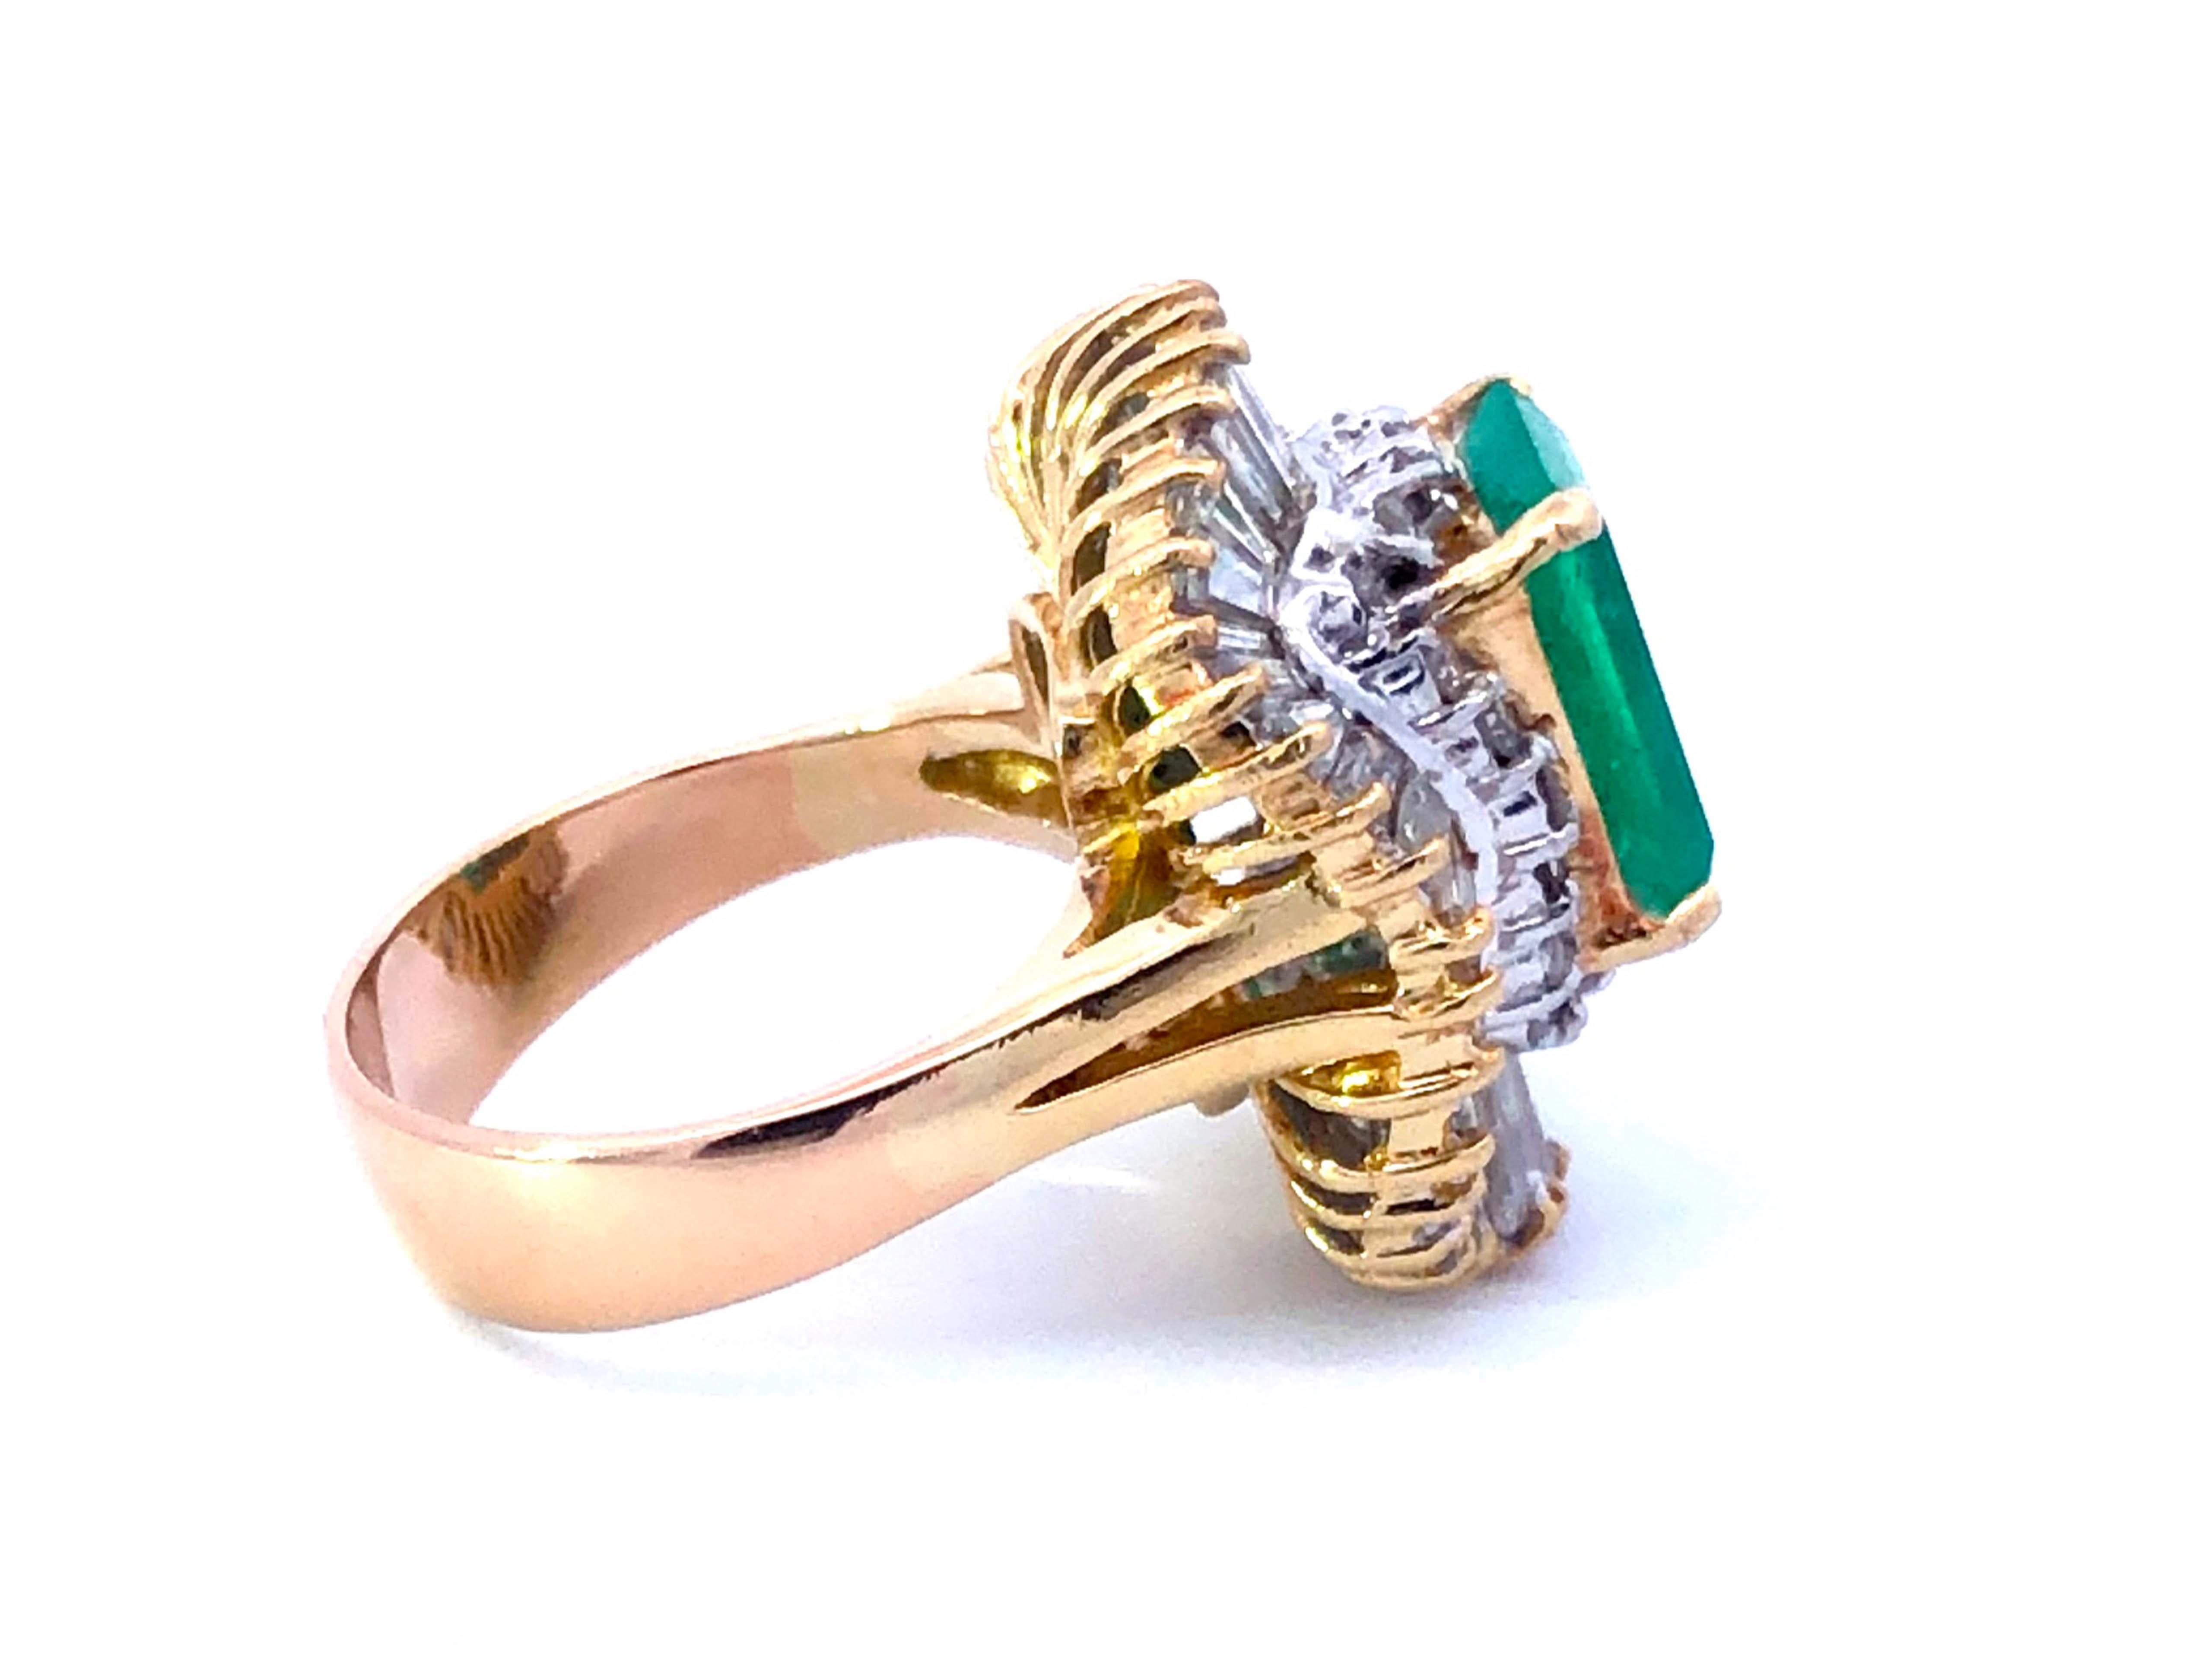 GIA Rare 4 ct. Colombian Emerald & Diamond Ballerina Ring in 18k Yellow Gold For Sale 1